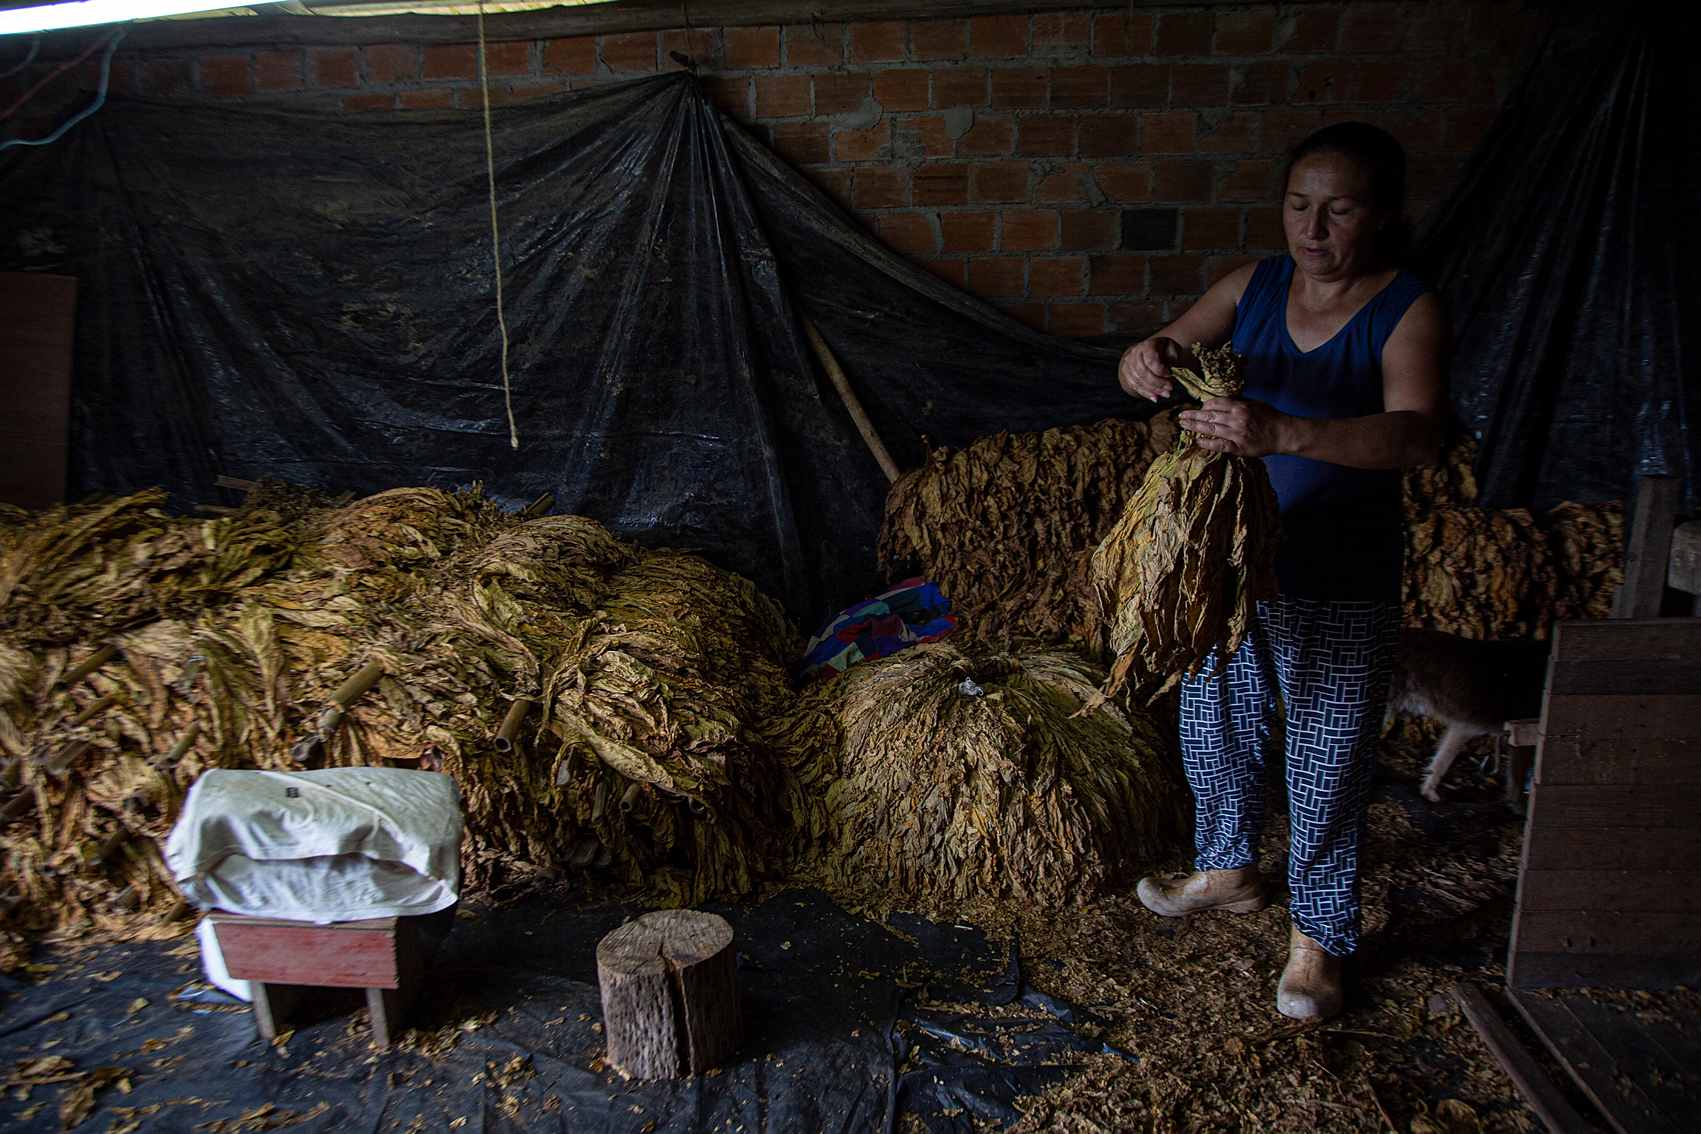 Salete Silva shows the dried tobacco leaves, which will be prepared for sale. Photo by Raquel Torres - CETAB/Fiocruz